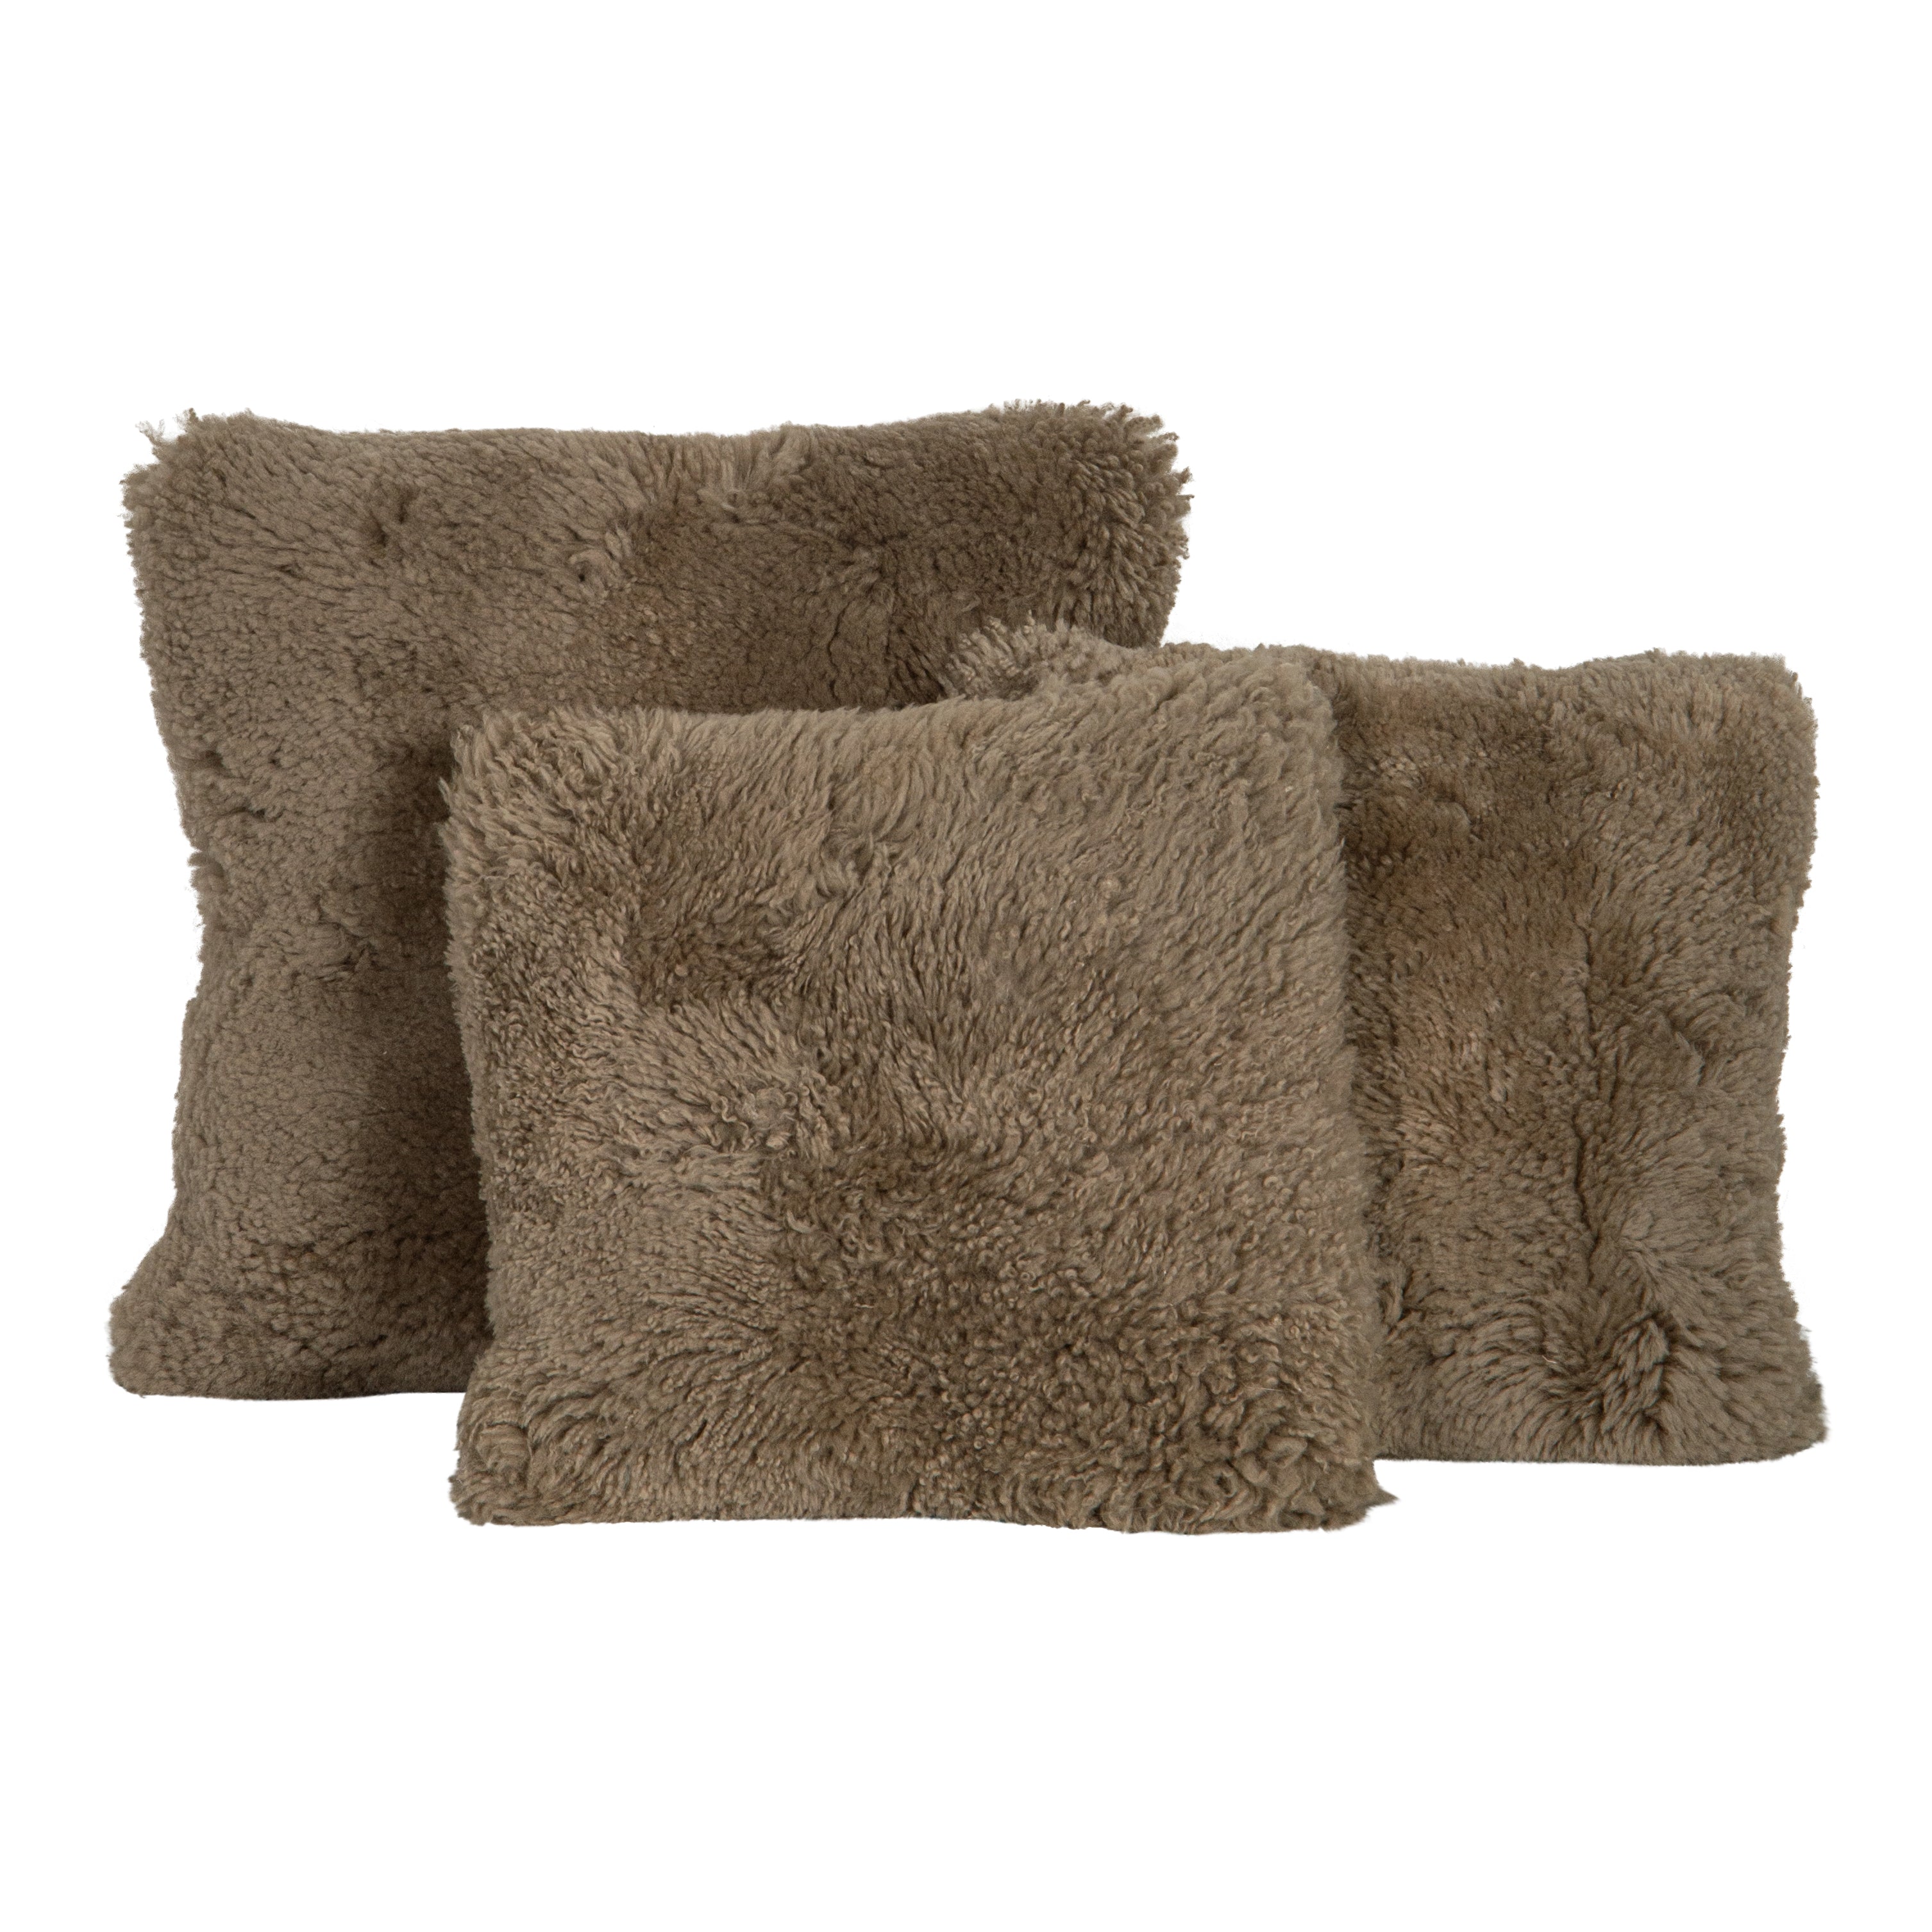 Moorly Brown Pillows (set of 3)